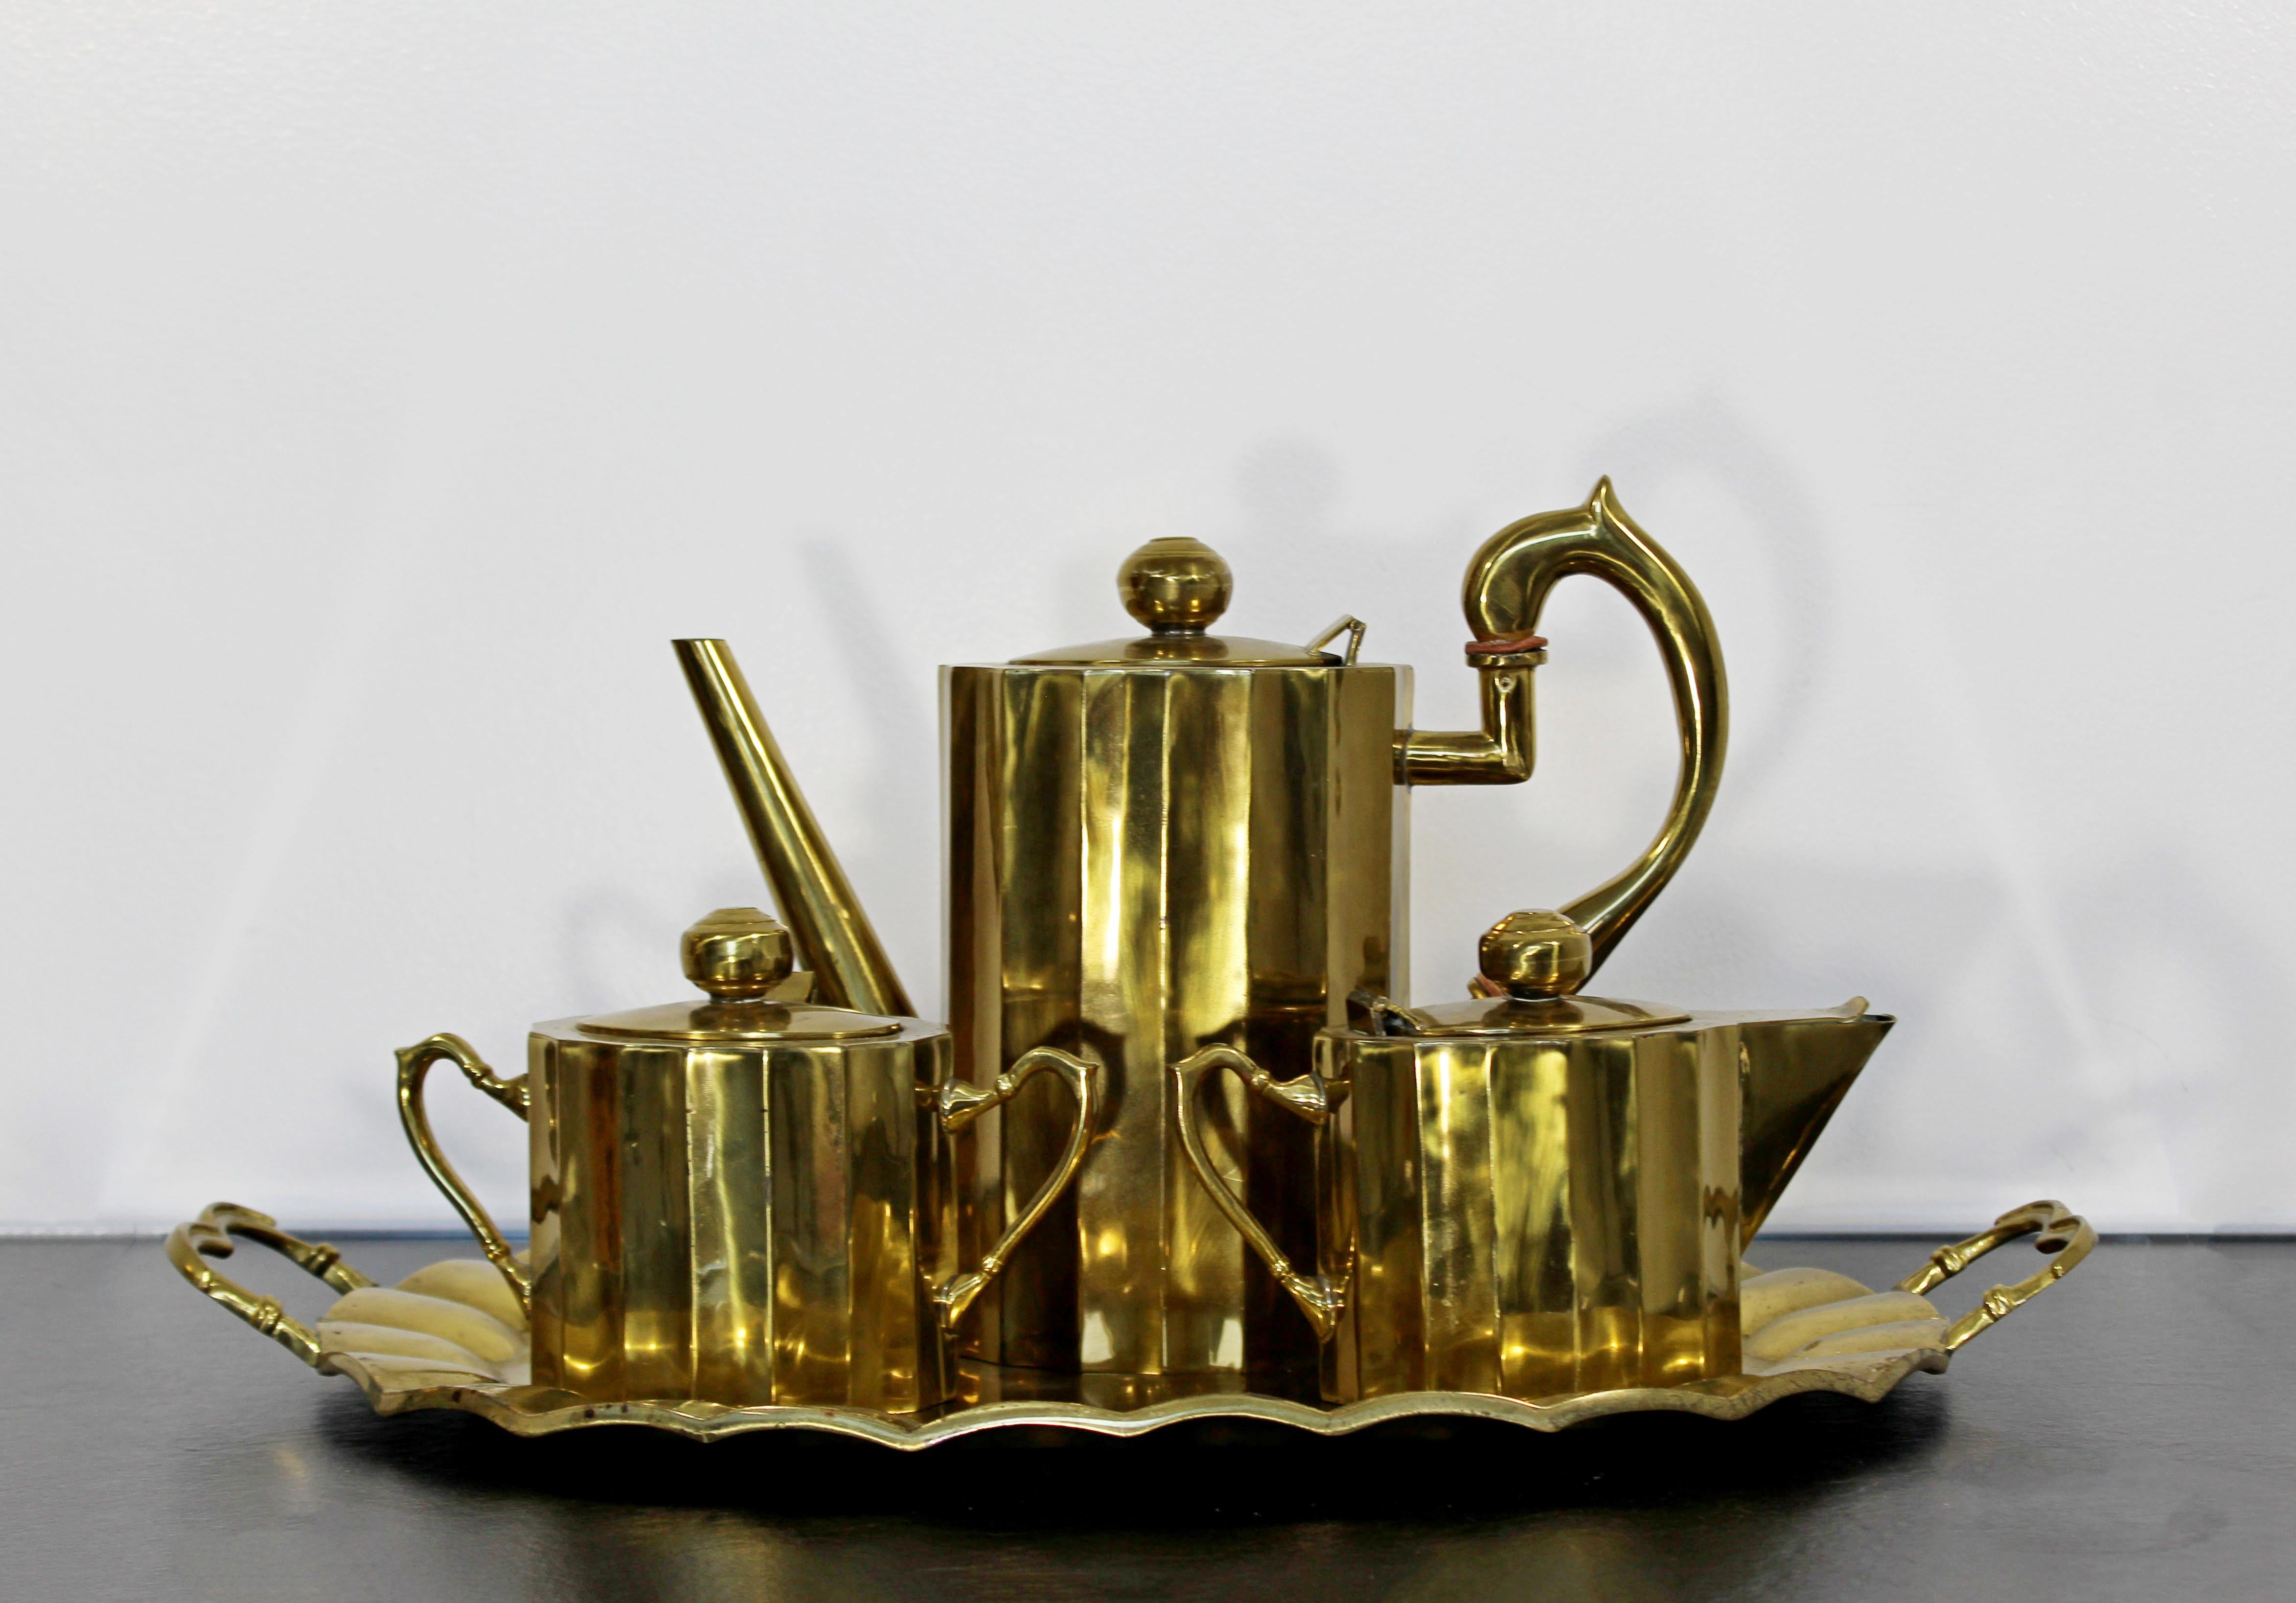 For your consideration is a fantastic, bronze tea or coffee set, including tray, coffee pot, creamer and sugar bowl. The set is stamped made in Mexico, and is attributed to J. Jiminez. In excellent condition, with a patina to match its age. The